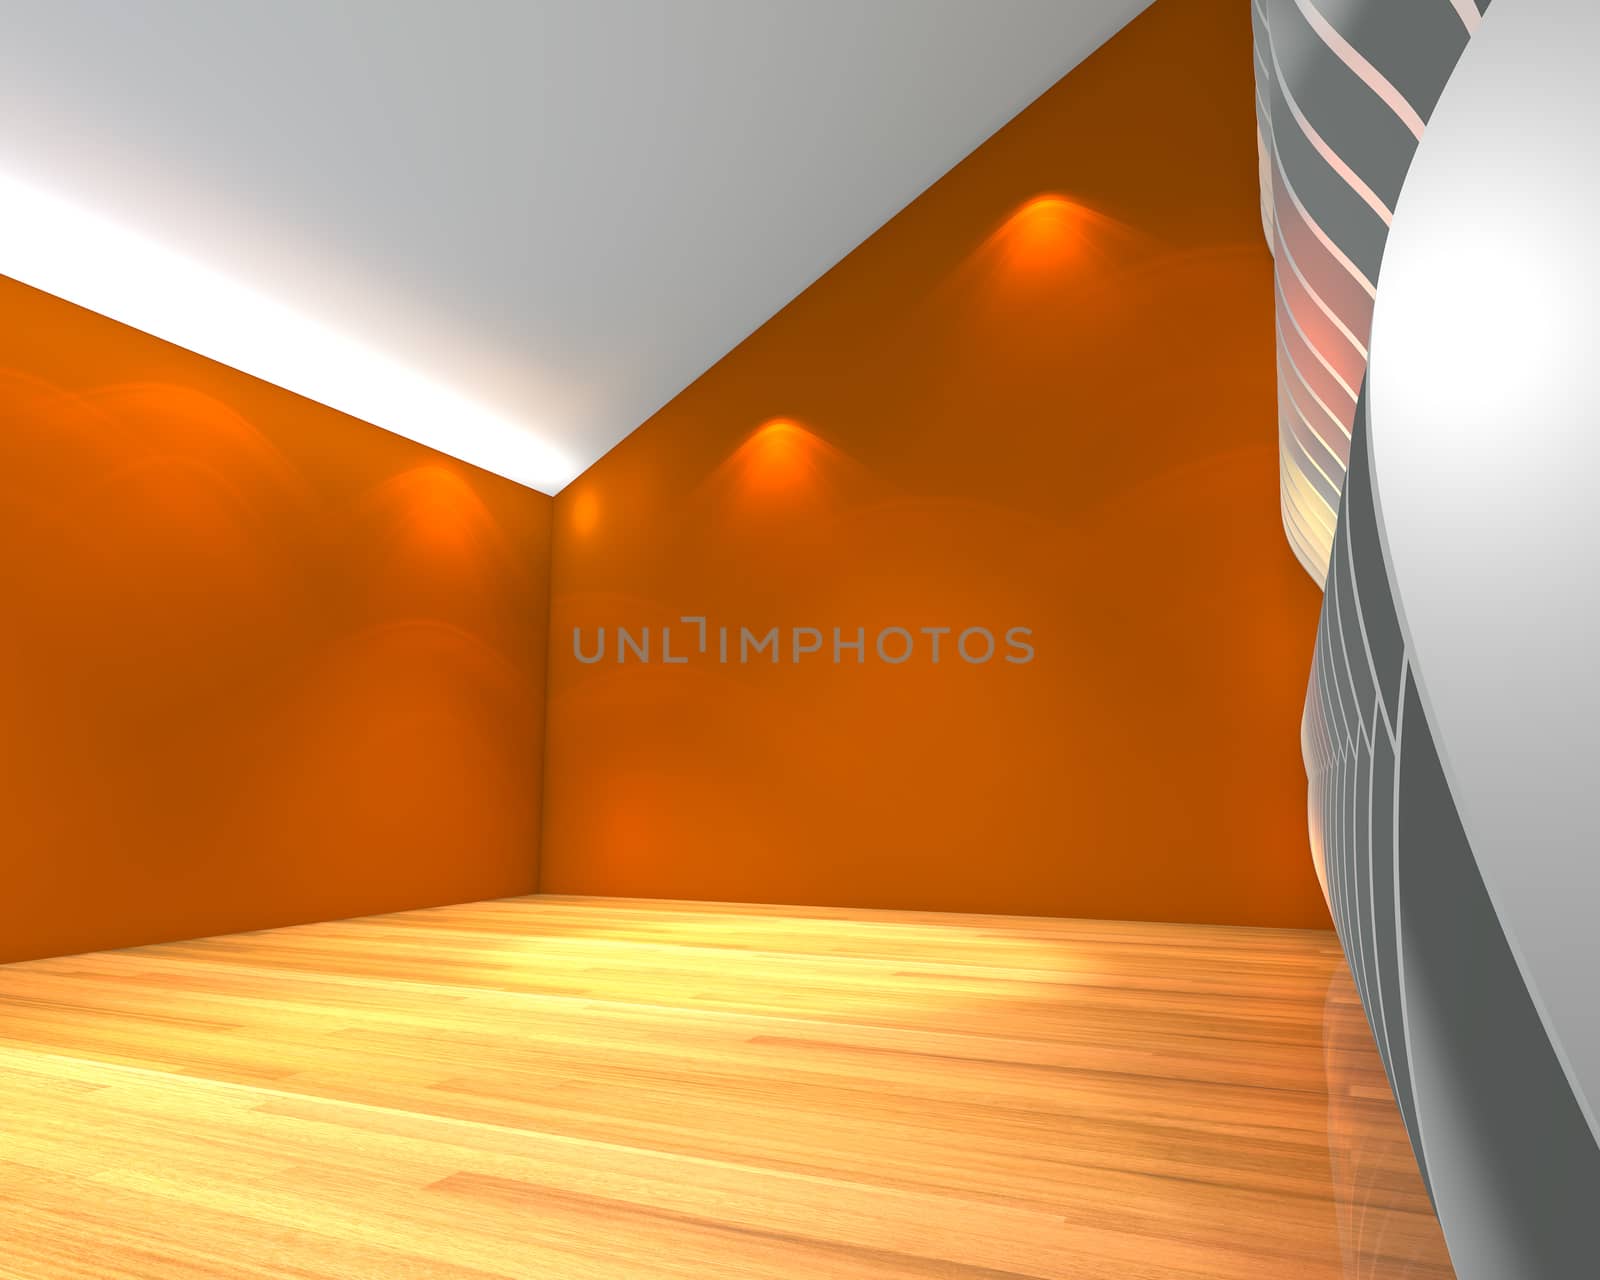 Abstract orange empty room with wave wall and decorated with wooden floors.